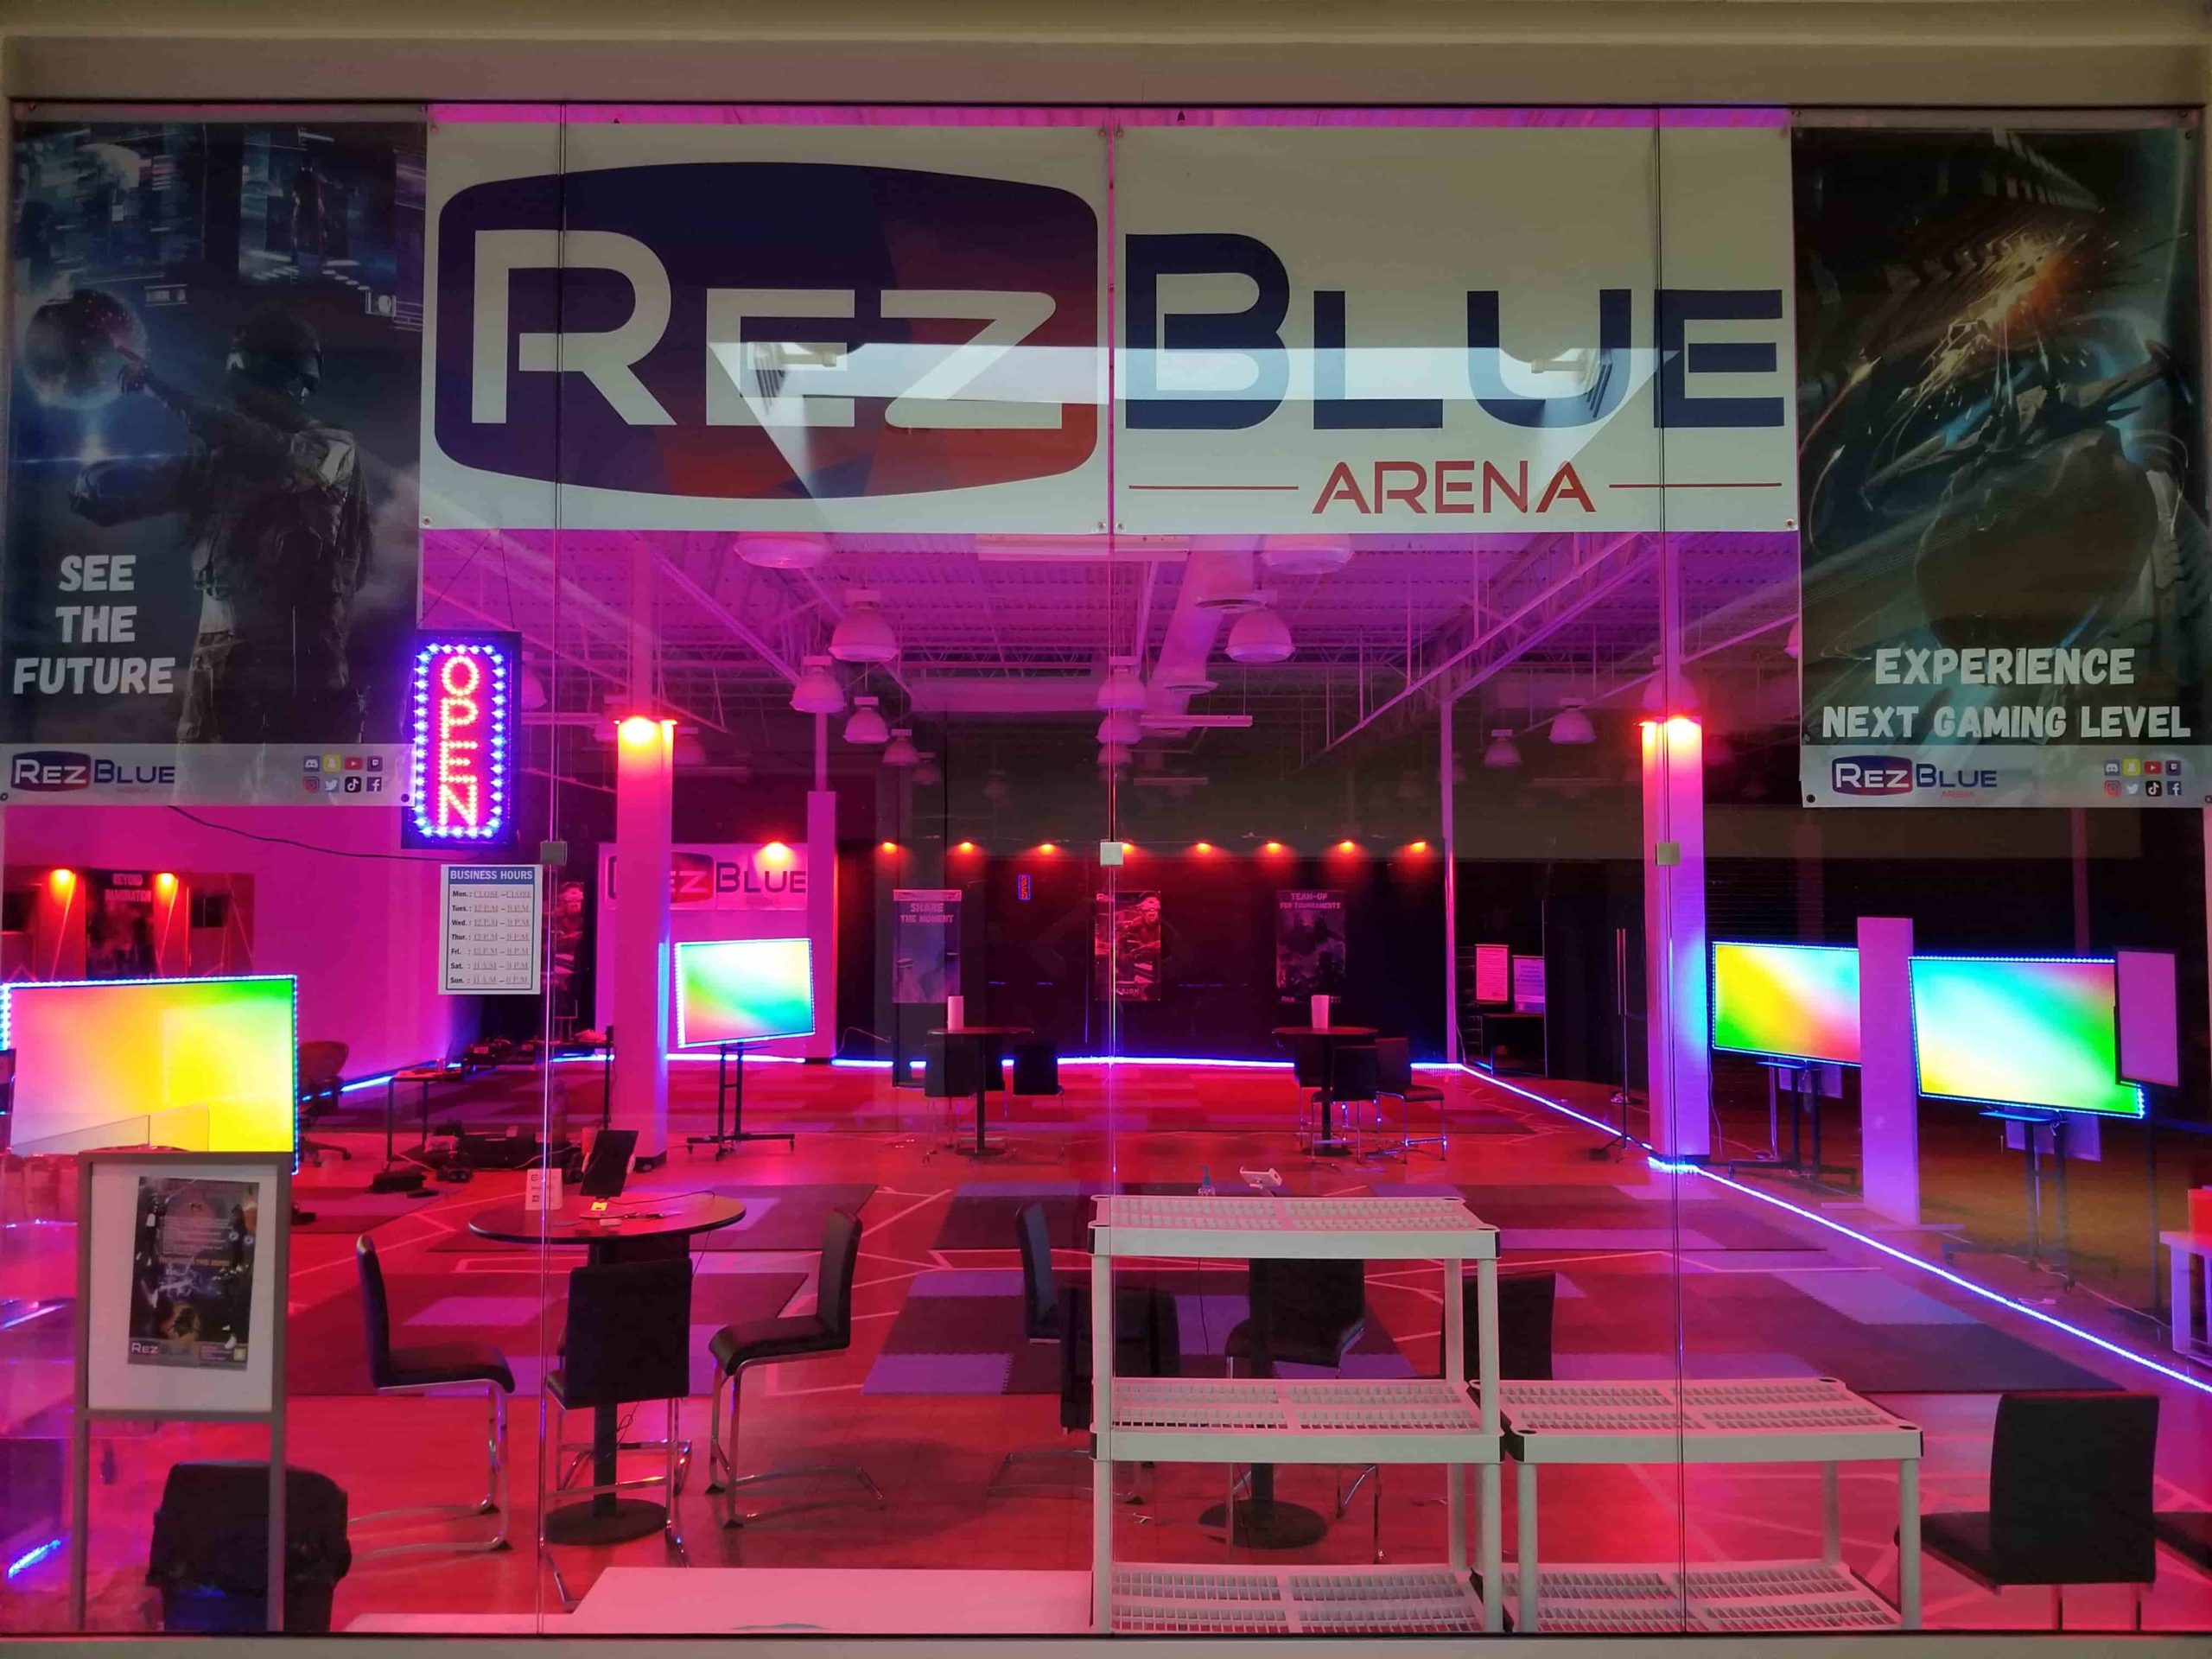 RezBlue Laser Tag, VR Arcade, Escape Room Des Moines, Birthday Party, looking for things to do in Des Moines, Iowa.